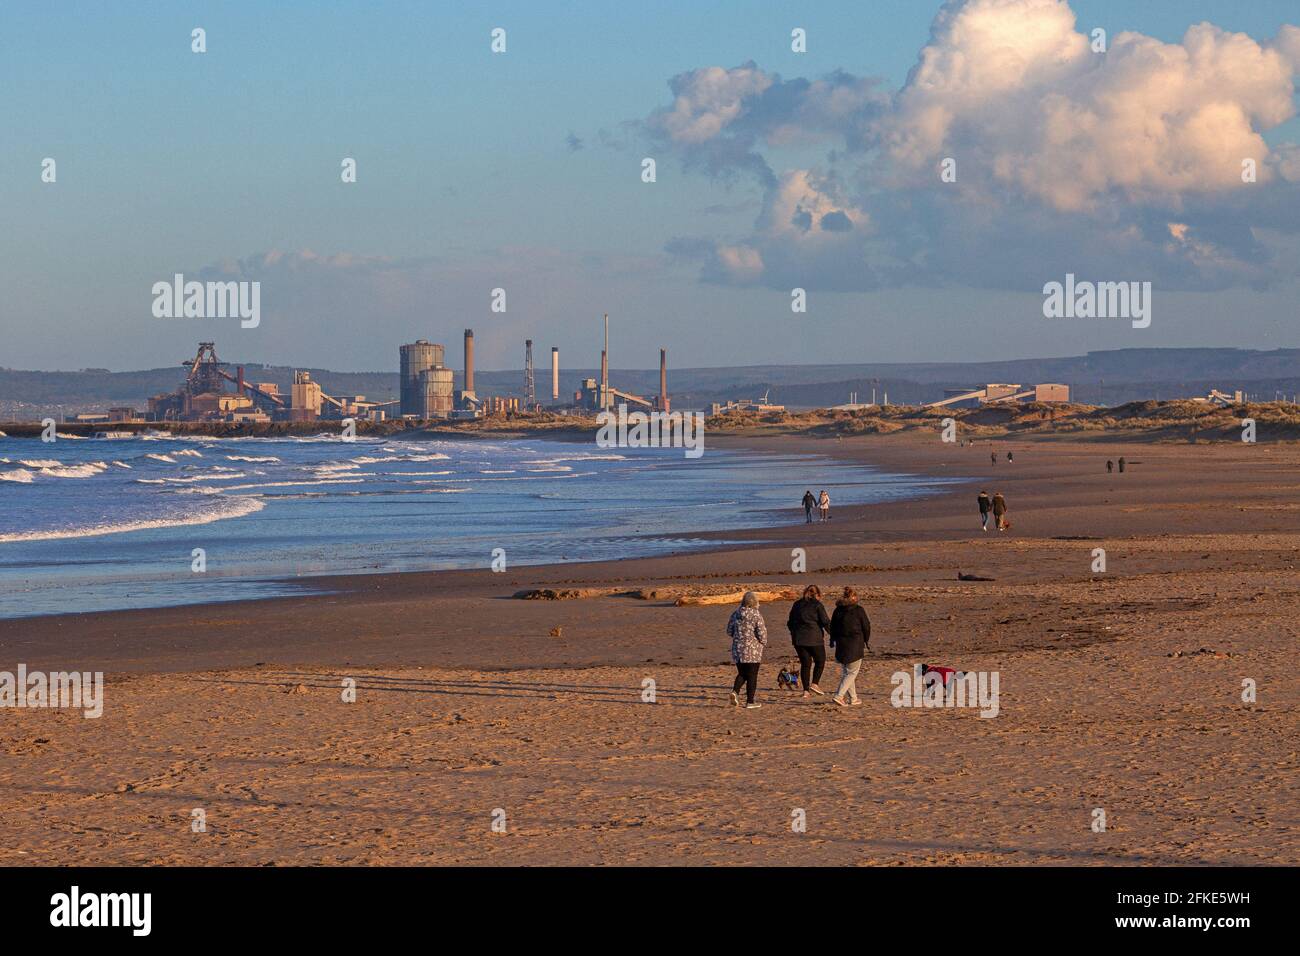 People walking along the beach with the Redcar steelworks in distance , England, UK Stock Photo